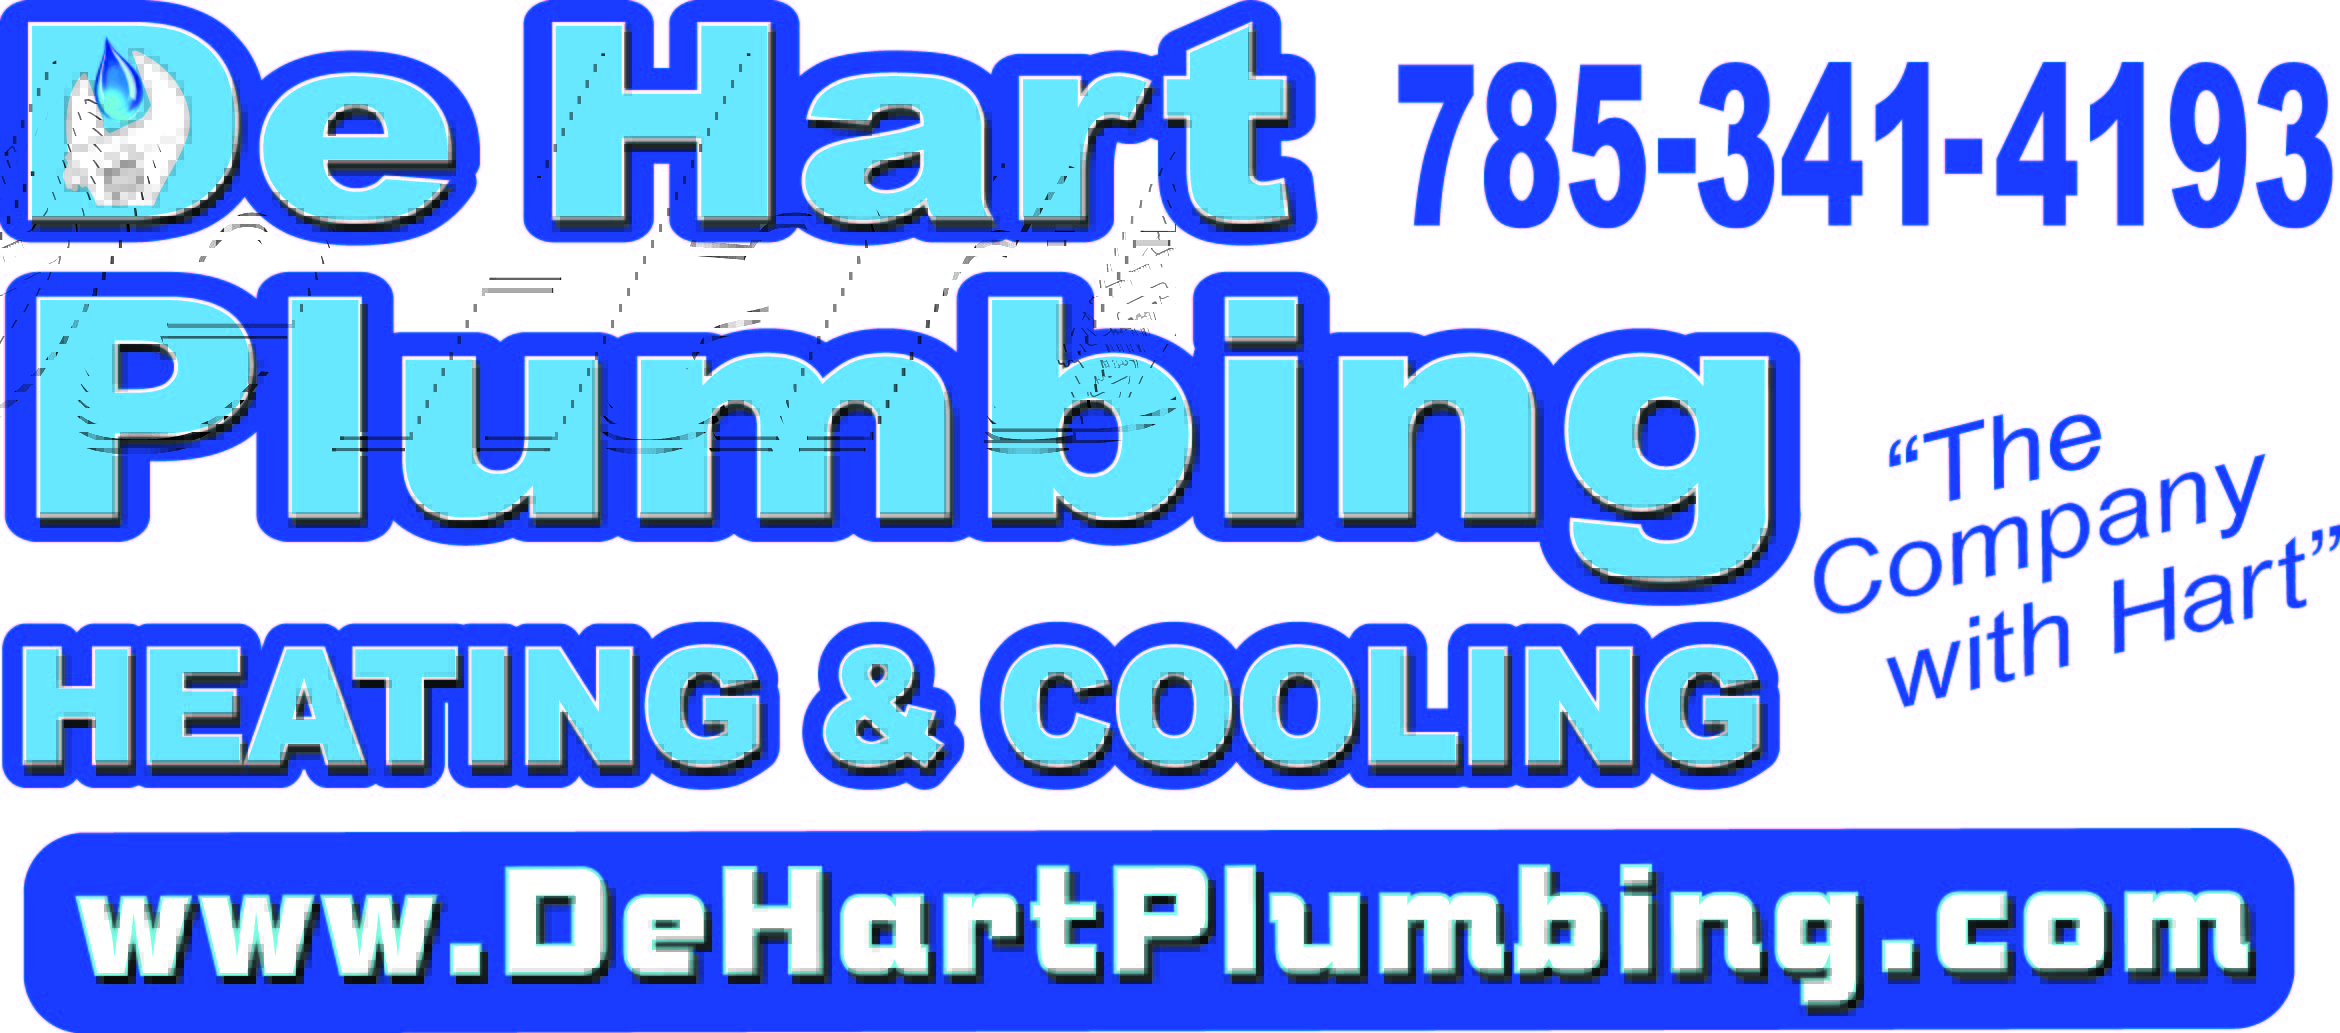 Plumbing Heating Cooling Company should my outside ac unit blow hot air water softener tax credit hvac services kansas air conditioner blowing hot air inside and cold air outside standard plumbing near me sink gurgles when ac is turned on government regulations on air conditioners manhattan ks water m and b heating and air manhattan kansas water bill furnace flame sensors can an ac unit leak carbon monoxide why does my ac keep blowing hot air furnace issues in extreme cold seer rating ac vip exchanger can you bypass a flame sensor my furnace won't stay on ac unit in basement leaking water faucet repair kansas city clean furnace ignitor r22 refrigerant laws can you buy r22 without a license manhattan remodeling new refrigerant regulations ac unit not blowing hot air central air unit blowing warm air bathroom remodeling services kansas city ks pilot light is on but furnace won't start bathroom restore why furnace won't stay lit k s services sewer line repair kansas city air conditioner warm air how to check the pilot light on a furnace manhattan ks pollen count cleaning igniter on gas furnace central air unit won't turn on why my furnace won't stay lit why won't my furnace stay on ac is just blowing air why is ac not turning on can t find pilot light on furnace how much for a new ac unit installed plumbing and heating logo r 22 refrigerant for sale air conditioner leaking water in basement ac unit leaking water in basement air manhattan where to buy flame sensor for furnace outdoor ac unit not blowing hot air drain tiles for yard furnace won't stay ignited ac plunger not working what if your ac is blowing hot air how to bypass flame sensor on furnace can i buy refrigerant for my ac what is a furnace flame sensor is r22 a cfc goodman ac unit maintenance how to light your furnace why is my ac not blowing hot air a better plumber heating and cooling home ac cools then blows warm gas not lighting on furnace how to fix carbon monoxide leak in furnace what are those tiny particles floating in the air standard thermostat ks standard ac service free estimate r22 drop-in replacement 2022 safelite manhattan ks goodman ac repair how to check for cracked heat exchanger heater not lighting energy efficient air conditioner tax credit 2020 why won t my furnace stay lit how does drain tile work bathroom remodel kansas vip air duct cleaning is a new air conditioner tax deductible 2020 how to bypass a flame sensor on a furnace ac blowing hot air instead of cold how to clean flame sensor in furnace 14 seer phase out my hvac is not blowing hot air how to check a pilot light on a furnace my ac is blowing warm air kansas gas manhattan ks my ac is not blowing hot air my gas furnace won't stay on gas furnace wont ignite bathroom remodel and plumbing ac system install goodman heating and air conditioning reviews how to find pilot light on furnace water heater repair kansas furnace will not stay running ac on but blowing warm air what does sump pump do what causes a heat exchanger to crack pilot is lit but furnace won t turn on do they still make r22 ac units problems with american standard air conditioners new flame sensor still not working cleaning services manhattan ks gas furnace won't ignite self igniting furnace won't stay lit ac blowing warm water heater installation kansas city cleaning a flame sensor can you clean a furnace ignitor air conditioning blowing warm air second ac unit for upstairs furnace flame won t stay lit carbon monoxide furnace leak ac sometimes blows warm air auto pilot light not working how to clean a dirty flame sensor k and s heating and air 1st american plumbing heating & air what does the flame sensor do on a furnace cleaning furnace burners all year plumbing heating and air conditioning how much is a new plumbing system pilot light furnace location manhattan kansas water ac leaking water in basement ac running but blowing warm air super plumbers heating and air conditioning furnace doesn't stay lit new epa refrigerant regulations 2023 sila heating air conditioning & plumbing ac started blowing warm air air conditioner blowing hot air instead of cold gas furnace pilot light out how to clean the sensor on a furnace when did they stop making r22 ac units furnace flame sensor cleaning a flame sensor on a furnace ac putting out hot air why won't my furnace stay lit goodman air conditioning repair how long does a furnace ignitor last sump pump repair kansas city my ac is blowing out warm air how to clean a flame sensor on a furnace how to clean furnace ignitor sensor commercial hvac kansas greensky credit union ac is not blowing hot air no flame in furnace what is an r22 ac unit heater won t stay lit bolts plumbing and heating furnace sensor replacement home heater flame sensor realize plumbing how to replace flame sensor on furnace american air specialists manhattan ks water bill hot air coming from ac how to get ac ready for summer ac warm air job openings manhattan ks ductless air conditioning installation manhattan house ac blowing warm air gas heater won t light ac blowing hot air in house pilot light on furnace won t light astar plumbing heating & air conditioning standard air furnace flame sensor where to buy heater won't light electric furnace pilot light what is seer on ac seer recommendations pha.com flame sensor rod check furnace pilot light cleaning flame sensor on furnace furnace won t stay running true home heating and air conditioning furnace repair star city how to clean furnace ignition sensor how to light a furnace how long does a furnace flame sensor last my furnace won t stay lit ac wont cut on when your air conditioner is blowing hot air central ac only blowing warm air why won t my furnace stay on jobs near manhattan ks filter delivery 24/7 ducts care bbb electric pilot light not working hot air coming out of ac cleaning the flame sensor on a furnace hvac blowing warm air on cool does a cracked heat exchanger leak carbon monoxide if ac is blowing warm air hvac blowing warm air mitsubishi mini split gurgling sound friendly plumber heating and air do they still make r22 freon manhattan gas company find pilot light on furnace ac is blowing warm air sewer line repair kansas r22 central air unit r22 clean flame sensor where is the flame sensor on a furnace pilot light on but furnace not working standard heating and air conditioning gas heater pilot light troubleshooting natural gas furnace won't stay lit goodman air conditioning and heating gas furnace will not ignite my house ac is blowing warm air ac unit blowing warm air inside standard heating and air minneapolis contractors manhattan ks plumbing heating and air when did r22 phase out individual room temperature control system ac slab does electric furnace have pilot light standard plumbing st george is a new hot water heater tax deductible 2020 fall furnace tune up how does a flame rod work appliances manhattan ks flame sensor cleaner furnace pilot lit but won't turn on how does filtrete smart filter work plumbing free estimate air wont kick on lake house plumbing heating & cooling inc what does flame sensor look like hvac repair manhattan seer 13 manhattan ks reviews heating and air free estimates plumbers emporia ks can a broken furnace cause carbon monoxide apartment ac blowing hot air 2nd floor air conditioner air condition wont turn on what to do if ac is blowing hot air manhattan air conditioner installation ac just blowing hot air how to light a gas furnace with electronic ignition how to get your furnace ready for winter dry cleaners in manhattan ks standard heating and cooling mn ac coming out hot furnace ignitor won't turn on what to do when ac blows warm air gas heater pilot light won't light is 14 seer going away furnace dirty flame sensor ac not working blowing hot air flame no call for heat flame sensor location on furnace air conditioner blowing warm air staley plumbing and heating ac repair kansas city ks bathroom tune up bathroom renovation kansas heat sensor furnace united standard water softener furnace pilot light won t light ac duct cleaning kansas city manhattan plumbing and heating electric igniter on furnace not working heater pilot light out warm ac furnace flame call standard plumbing bathroom plumbing remodel furnace burners won't stay lit a-star air conditioning and plumbing big pha hvac installation kansas r22 refrigerant ac unit onecall plumbing heating & ac manhattan sewer system furnace leaking carbon monoxide leak detection kansas city hotel rooms manhattan ks how to find the pilot light on a furnace standard air conditioning temperature in junction city kansas bills heating and cooling reviews goodmans air conditioners wake sewer and drain cleaning service how to bypass flame sensor flame sensor in furnace clark air services junction city plumbers how to test a furnace ignitor why is hot air coming out of ac furnace ignitor sensor cracked heat exchanger carbon monoxide boiler repair kansas cleaning furnace ignitor home heating history and plumbing and heating warm air coming from ac why won't my pipe stay lit can't find pilot light on furnace pedestal sump pump parts ignitor sensor furnace heat repair service how to fix frozen air conditioner best way to clean flame sensor standard heating and cooling plumbing heating the standard reviews furnace pilot wont light gas not getting to furnace 24/7 ducts cares reviews k's discount r22 discontinued fix all plumbing lowest seer rating allowed free estimate plumber water softeners kansas heater flame sensor my furnace wont ignite federal tax credit for high efficiency furnace can you pour hot water on a frozen ac unit electric furnace won't come on furnace won t light manhattan sewer inside ac unit won't turn on furnace doesn t stay lit hvac junction city ks field drain tile installation ac not blowing hot air goodman air conditioner repair pollen count manhattan ks testing a furnace ignitor why is my ac blowing warm air furnace pilot light won't light warm air coming out of ac cleaning flame sensor ac repair in kansas city furnace won't ignite pilot standard plumbing and heating canton ohio flynn heating and air conditioning kansas gas service manhattan kansas shower remodel kansas air vent cleaning kansas city gas furnace won t stay lit electric pilot light won't light sump pump installation kansas replace flame sensor on furnace r22 refrigerant discontinued standard heating & air conditioning company pha com current temperature in manhattan kansas furnace won't stay running air conditioning services kansas manhattan plumbing bathroom remodel plumbing gas heater will not stay lit what is a flame sensor on a furnace furnace temp sensor flame sensor clean heater won't stay lit plumbing payment plans r22 ac units watch repair manhattan ks furnace repair kansas ks discount why ac is not turning on goodman ac maintenance air conditioner leaking in basement how to see if pilot light is on furnace heater repair free estimate if your air conditioner blows hot air what does flame sensor do on furnace location of flame sensor on furnace ac won't turn on how to clean ignition sensor on furnace temperature in manhattan ks how to clean furnace ignitor goodman repair service near me flame sensor furnace replacement minimum seer rating by state ac pumping warm air ac blowing warm air heater repair kansas city ks maintenance pilot not staying lit on furnace how to clean my furnace flame sensor junction city to manhattan ks ac blowing out warm air heat pump leaking water in basement why does the flame keep going out on my furnace how to clean the flame sensor on a furnace when ac is blowing warm air ac blowing out hot air in house furnace wont light ac unit outside blowing hot air plumbing heating and air conditioning furnace sensors hood plumbing manhattan ks furnace will not light new furnace and ac tax credit hvac flame sensor flame not staying lit on furnace work from home jobs manhattan ks why does ac blow warm air a c seer rating how to clean a flame sensor on a gas furnace home ac blowing warm air seer ratings ac electric water heater installation kansas city can a dirty filter cause ac to blow warm air why is my air conditioner not blowing hot air where can i buy a flame sensor for my furnace where to buy flame sensor near me ac only blowing warm air how to light furnace furnace plugged into outlet tax deduction for new furnace plumbing classes nyc flame sensor cleaning checking pilot light on furnace furnace not lighting air quality in manhattan clean flame sensor still not working gas furnace does not ignite flame sensor for furnace mini split gurgling sound k & s plumbing services how to check a flame sensor on a furnace how do you light a furnace should outside ac unit blow cool air water leaking from ac unit in basement goodman ac service near me hvac tax credit 2020 how to check if your furnace is working furnace heat sensor replacement goodman heating and air conditioning pilot light on furnace went out bills plumbing near me bathroom remodelers kansas city ks heat pump repair kansas city hvac unit blowing warm air shortsleeves air conditioner does not turn on ac condenser blowing hot air air conditioner just blowing air ac company kansas gas furnace won't light how to clean a furnace ignitor appliance repair manhattan ks dry cleaners manhattan ks can see the air coming out of ac dirty flame sensor gas furnace mitsubishi mini split clogged drain how to check furnace flame sensor sump pump repair kansas routine plumbing maintenance bathroom remodel manhattan where is the pilot light on a furnace mini-split ac kansas airteam heating and cooling how to clean sensor on furnace ductless mini splits tonganoxie ks vip sewer and drain services gas furnace heat sensor b glowing reviews how to ignite furnace furnace sensor cleaning leak detection kansas bathroom remodeling kansas heating and air conditioning replacement bypassing flame sensor gas manhattan ks ac blowing heat air quality testing kansas manhattan air conditioning company how to fix a broken air conditioner furnace takes a long time to ignite bypass flame sensor where is the flame sensor goodman kansas furnace ignition sensor furnace won t ignite air conditioner blowing warm goodman heating and plumbing furnace flame sensor testing furnace won t turn on after summer we stay lit flame sensor on furnace gas furnace flame sensor cleaning standard heating and air coupon vent cleaning kansas city the manhattan kc how to check if the pilot light is on furnace air conditioner blowing hot air in house ac doesn't turn on drain and sewer services near me furnace flame sensor cleaning warm air blowing from ac free ac estimate when did r22 get phased out tankless water heater installation kansas energy efficient tax credit 2020 indoor air quality services gas furnace won't stay lit american standard thermostat says waiting hvac blowing hot air instead of cold furnace will not stay lit breathe easy manhattan ks how do flame sensors work tankless water heater kansas city ac making static noise testing furnace ignitor drain tile installation what does a flame sensor do standard heating & air conditioning inc air condition goodman house cleaning services manhattan ks furnace trying to ignite furnace will not stay on hvac repair kansas why is my ac blowing heat how to fix a furnace that won't ignite k's cleaning commercial hvac kansas city how to check furnace pilot light furnace doesn't stay on when ac blows warm air one call plumbing reviews flame sensor for heater furnace won't ignite heating cooling apartments in manhattan discount heating and air furnace flame not coming on furnace heater sensor clean the flame sensor seer on ac pilot light on electric furnace standard air and heating how do drain tiles work be able manhattan ks gas heater won't ignite air conditioner won't turn on furnace flame rod gas furnace not staying lit furnace won't light clean flame sensor furnace plumbing and maintenance why is my central air blowing warm air how to clean flame sensor furnace can a broken ac cause carbon monoxide air b and b manhattan ks ac is blowing warm air in house furnace flame not staying on flame sensor furnace cleaning how to check for a cracked heat exchanger flame sensor replacement ac blowing warm air house ac not turning on professional duct cleaning and home care flame sensors for furnace air conditioner repair manhattan lit standard how to clean furnace burner sila plumbing and heating air conditioner installation kansas my furnace won't stay lit outside unit not blowing hot air can you light a furnace with a lighter best drop in refrigerant for r22 central air blowing warm bathroom remodel plumber how to find flame sensor on furnace flame sensor energy star windows tax credit 2020 ac ratings pilot light furnace not working heating plumbing and air conditioning tax credit for new furnace and air conditioner 2020 furnace installation kansas flynn air conditioning emergency ac repair kansas testing a flame sensor how to clean igniter on furnace warm air blowing from a c furnace no flame water heater installation kansas pilot light on but heater not working my air conditioner is blowing warm air indoor air quality testing kansas air conditioner maintenance kansas ac unit won't turn on does hvac include plumbing air conditioner blowing out warm air drain clogs dalton air conditioning discount home filter delivery ductless ac kansas why is my ac just blowing air gas company manhattan ks done plumbing and heating reviews goodman furnace repair near me pilot won t light on furnace gas heater flame sensor standard heating and air birmingham furnace isn't lighting home works plumbing and heating air conditioner blowing warm air in house discount plumbing & heating top notch heating and cooling kansas city why is ac blowing warm air manhattan air quality pilot light won't turn on how to light gas furnace air conditioner cottonwood screen air conditioners goodman save a lot on manhattan pilot light location on furnace how often to clean furnace flame sensor tankless water heater installation kansas city dirty furnace flame sensor ks bath troubleshooting gas furnace with electronic ignition drain and sewer services goodman air conditioners cleaning furnace flame sensor manhattan ks gas furnace flame sensor rod standard bathroom remodel manhattan plumbers how to light an electric furnace home run heating and air ac free estimate does ac blow hot air my furnace won't light why is my air conditioner blowing warm air home remodeling manhattan 5 star plumbing heating and air pilot light won t light on gas furnace why is my ac warm fort riley srp phone number flynn plumbing r22 refrigerant for sale m and w heating and air emergency plumber manhattan how to check pilot light on furnace parts of a sump pump system flame sensor furnace location ignition sensor furnace central air only blowing warm air why is my ac unit blowing warm air why is the ac not turning on heater not lighting up air conditioner check electric heater pilot light drain cleaning dalton how much to have ac installed secondary ac unit air conditioner not blowing hot air standard privacy policy www standardplumbing com clark's heating and air reviews gas furnace won t light bathtub remodel kansas plumbing companies with payment plans plumbing maintenance services junction city ks to manhattan ks air conditioner repair kansas north star water softener hardness setting gas furnace wont light manhattan ks temperature furnace repair kansas city ks used r22 ac units for sale save-a-lot on manhattan discount plumbing heating & air furnace won t stay lit central air is blowing warm air gas heater won't light why won't furnace stay lit dirty flame sensor air duct cleaning kansas ignition sensor for furnace c and l heating and air drain pipe installation kansas city how to clean furnace flame sensor leaking heat exchanger furnace light not on furnace ignitor cleaning r22 cfc how to clean flame sensor on furnace refrigerant changes 2023 what is seer rating for ac asap fort riley ductwork kansas pilot light won't ignite bathroom remodeling manhattan sump pump parts near me furnace heat sensor pilot heater won't light why won't furnace ignite mitsubishi manhattan ks standard plumbing garbage disposal furnace has no flame flame sensor gas furnace temperature manhattan burner won't stay lit cracked furnace ignitor home ac blows warm air then cold air conditioner doesn't turn on furnace pilot not lighting furnace sensor how long do flame sensors last kansas gas service manhattan ks central air conditioner blowing warm air where is pilot light on furnace hot water heater kansas city why is my ac blowing out warm air furnace sensor dirty air conditioning replacement manhattan mt why does my ac blow warm air how does a furnace flame sensor work furnace burners won t stay lit do you tip hvac cleaners field tile installation ac condenser not blowing hot air high water plumbing and heating the standard manhattan heat pump kansas city plumbing heating and air conditioning near me gas furnace ignition sensor what hvac system qualifies for tax credit 2020 furnace won't stay on alternative air manhattan ks outside ac unit blowing warm air what does the flame sensor look like why is my air conditioner blowing warm reasons why furnace won't stay lit furnace flames go on and off cost of new ac unit installed how does furnace flame sensor work temp manhattan ks seer rating for ac ac seer rating furnace won't turn on after summer task ac units should outside ac unit blow hot air how to install drain tile in field kansas phcc ks meaning in plumbing where is flame sensor on furnace what does a furnace flame sensor do heat sensor for furnace hvac bangs when turning off broken flame sensor new plumbing system what does a flame sensor do on a furnace dr plumbing manhattan ks john and john plumbing duct cleaning kansas ks heating r22 ac ks heating and air pilot not lighting on furnace r22 freon discontinued clark air systems why is my ac making a weird noise marc plumbing ac cools then blows warm goodman ac service deal heating and air test furnace ignitor do plumbers work on furnaces hot air is coming from ac 24/7 ducts care reviews north star water softener reviews sump pump kansas city foundation repair manhattan ks furnace flame sensor test how does a flame sensor work flame sensor vs ignitor drain cleaning kansas pilot light out on furnace how to ignite pilot light on furnace discount plumbing heating and air gas furnace flame sensor how much is a new ac unit installed how many sump pumps do i need testing flame sensor annual plumbing maintenance duct work cleaning kansas city furnace wont stay on why my furnace won't light test flame sensor furnace water softener kansas city pilot light is on but furnace won t start how to clean furnace burners sump pump installation kansas city filter delivery service manhattan ks air quality how to fix pilot light on furnace how to clean a flame sensor furnace wont stay lit gas furnace sensor lighting a furnace ac is blowing hot air in house dirty flame sensor furnace warm air coming out of ac vents k&s heating and air reviews high efficiency gas furnace tax credit dalton plumbing heating and cooling plumbers in junction city ks sila heating and plumbing goodman air conditioning how to fix ac blowing warm air hvac payment plans k s heating and air furnace flame sensor near me how to test a flame sensor on a furnace plumbers nyc how to fix a goodman air conditioner drain and sewer repair how to light electric furnace pilot light is on but furnace won't fire up why ac not turning on stritzel heating and cooling sewer repair kansas city how to clean flame sensor on gas furnace how to fix ac blowing hot air in house how to clean the flame sensor r22 ac unit for sale heating and air plumbing ac has power but won't turn on cleaned flame sensor still not working ac unit wont turn on flame sensor location ac blow warm air outside ac unit blowing hot air manhattan ks appliance store pilot light furnace won't light dirty flame sensor on a furnace how to clean flame sensor rod what causes a cracked heat exchanger why is my hvac not blowing hot air manhattan ks to junction city ks manhattan plumber how to clean furnace sensor goodman distribution kansas city my furnace won t stay on ac unit only blowing hot air ks heating and cooling kansas city furnace replacement mini heart plumbing furnace has trouble igniting what is a flame sensor furnace won t stay on goodman ac problems standard heating reviews how to find furnace pilot light professional duct cleaners plumbing sleeves air conditioner will not turn on temp in manhattan ks seer requirements by state furnance flame sensor ac blowing warm air home manhattan ks temp positive plumbing heating and air electric pilot light furnace furnace not staying lit lit plumbing how do i fix my ac from blowing hot air ac repair manhattan ks standard heating and air clean furnace flame sensor hot water heater buy now pay later standard plumbing manhattan ks heat pump installation kansas plumbing & air star heating goodman furnace service near me flame sensor for gas furnace handyman manhattan ks k s plumbing flame ignitor furnace standard heating and plumbing furnace temperature sensor furnace won't stay lit flame sensor how to clean a furnace flame sensor standard plumbing & heating does air duct cleaning make a mess heating and air companies furnace doesn t stay on gas furnace won t stay on heating and air manhattan ks basement air conditioner leaking water flame sensor furnace ac unit blowing warm air standardplumbing ks plumbing most accurate room thermostat where is the flame sensor on my furnace plumbers manhattan ks clear air duct cleaning new drain installation save a lot manhattan 5 star air quality furnace repair nyc plumbers in manhattan ks furnace replacement kansas standard plumming what to do if your ac is blowing hot air plumber payment plan clean flame sensor with dollar bill how to clean flame sensor hvac manhattan plumbers manhattan how to tell if your furnace pilot light is out air quality junction city oregon standard manhattan plumbing system maintenance goodman plumbing and heating plumber manhattan ks standard heating & air conditioning super brothers plumbing heating & air how to fix a cracked heat exchanger plumbing and ac repair pilot light on furnace is out duct cleaning manhattan ks vip duct cleaning furnace flame sensor replacement manhattan water company furnace not staying on manhattan bathroom remodeling furnace pilot won't ignite plumber manhattan buy r22 refrigerant online air duct cleaning manhattan ks standard plumbing heating and air do i need a mini split in every room ac maintenance kansas dirty furnace burners furnace pilot light out flame sensor testing hvac manhattan ks replaced flame sensor still not working ac tune up kansas city standard bathroom furnace won't stay lit burners not lighting on furnace why is my ac blowing warm air in my house srp fort riley plumbing manhattan ks flame rod in furnace standard heating manhattan ks plumbers ks heating and plumbing temperature manhattan ks where's the pilot light on a furnace furnace flame sensor location standard plumbing and heating standard plumbing how to install drainage tile in your yard new ac installation when do you turn off heat in nyc